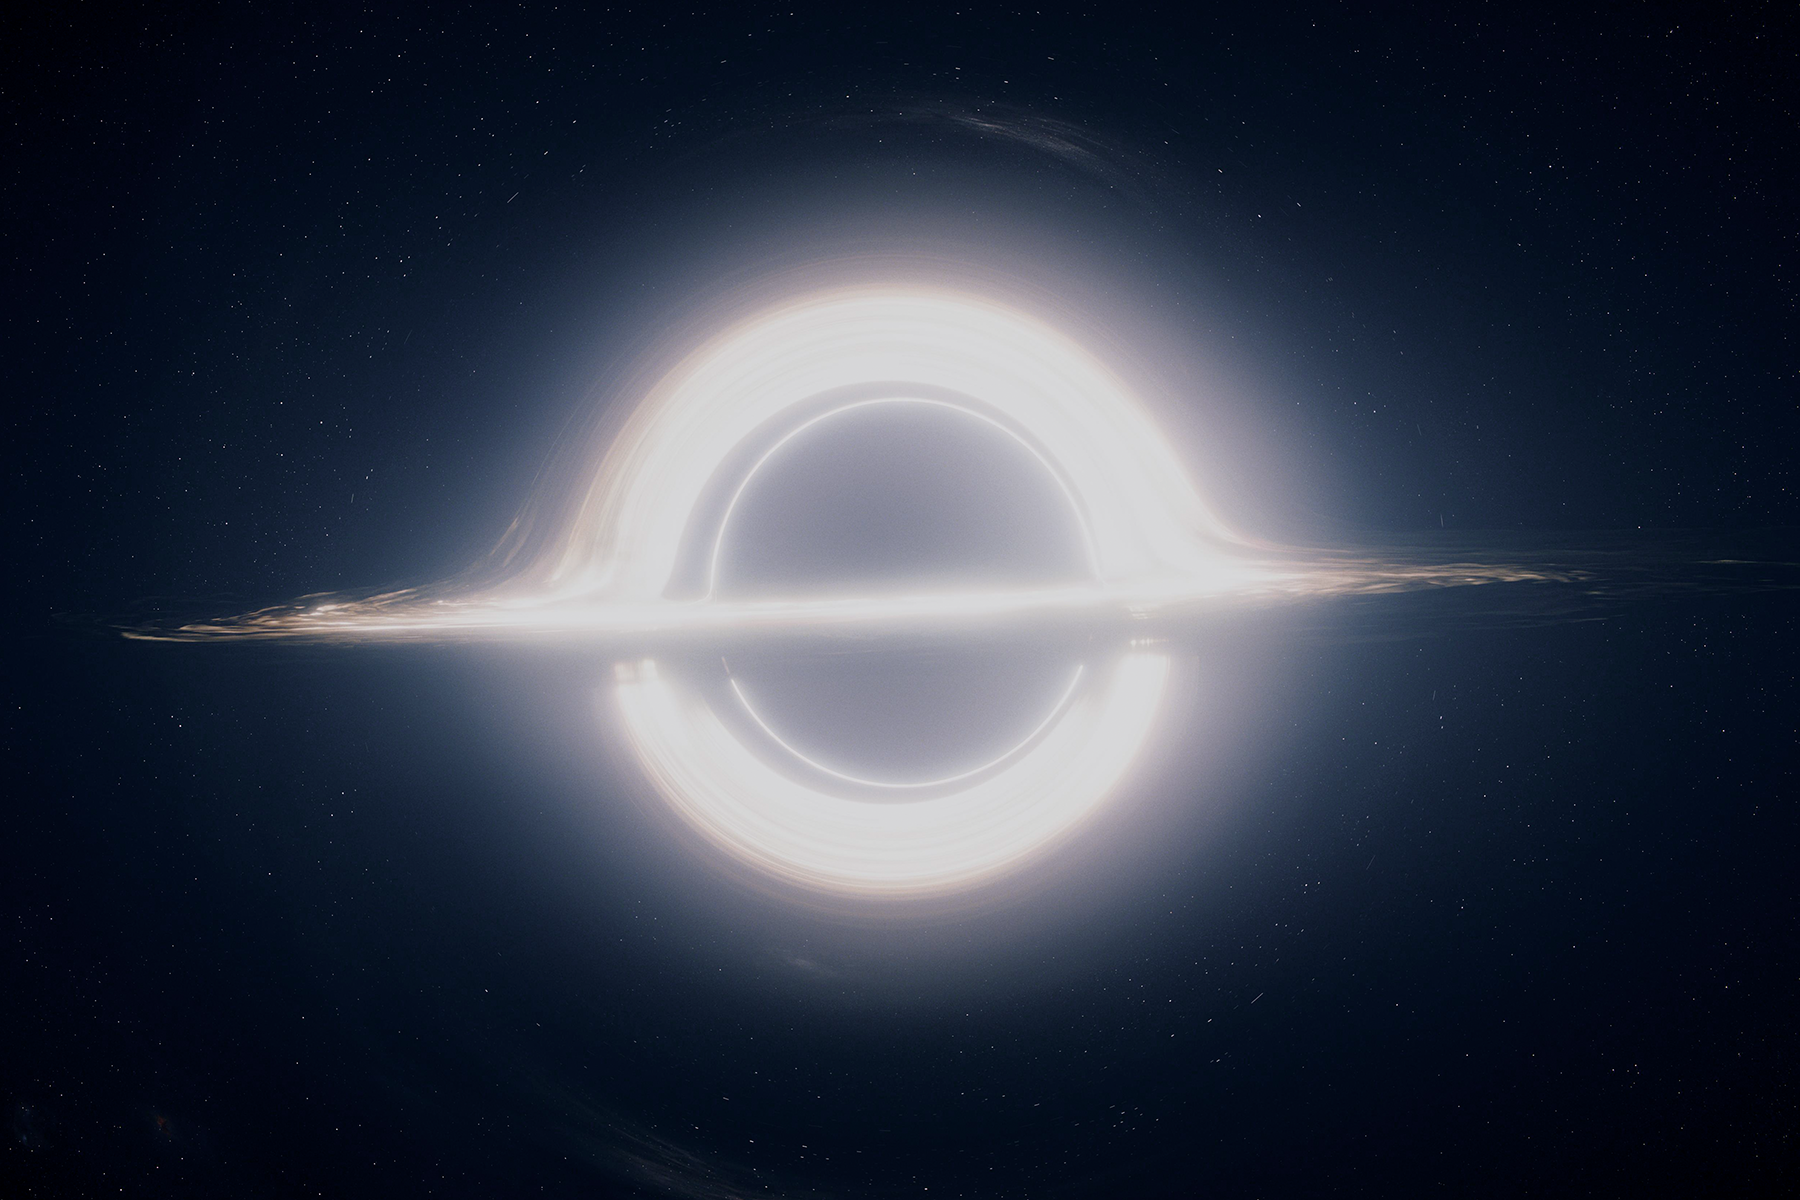 If interstellar was made by Dysthymic